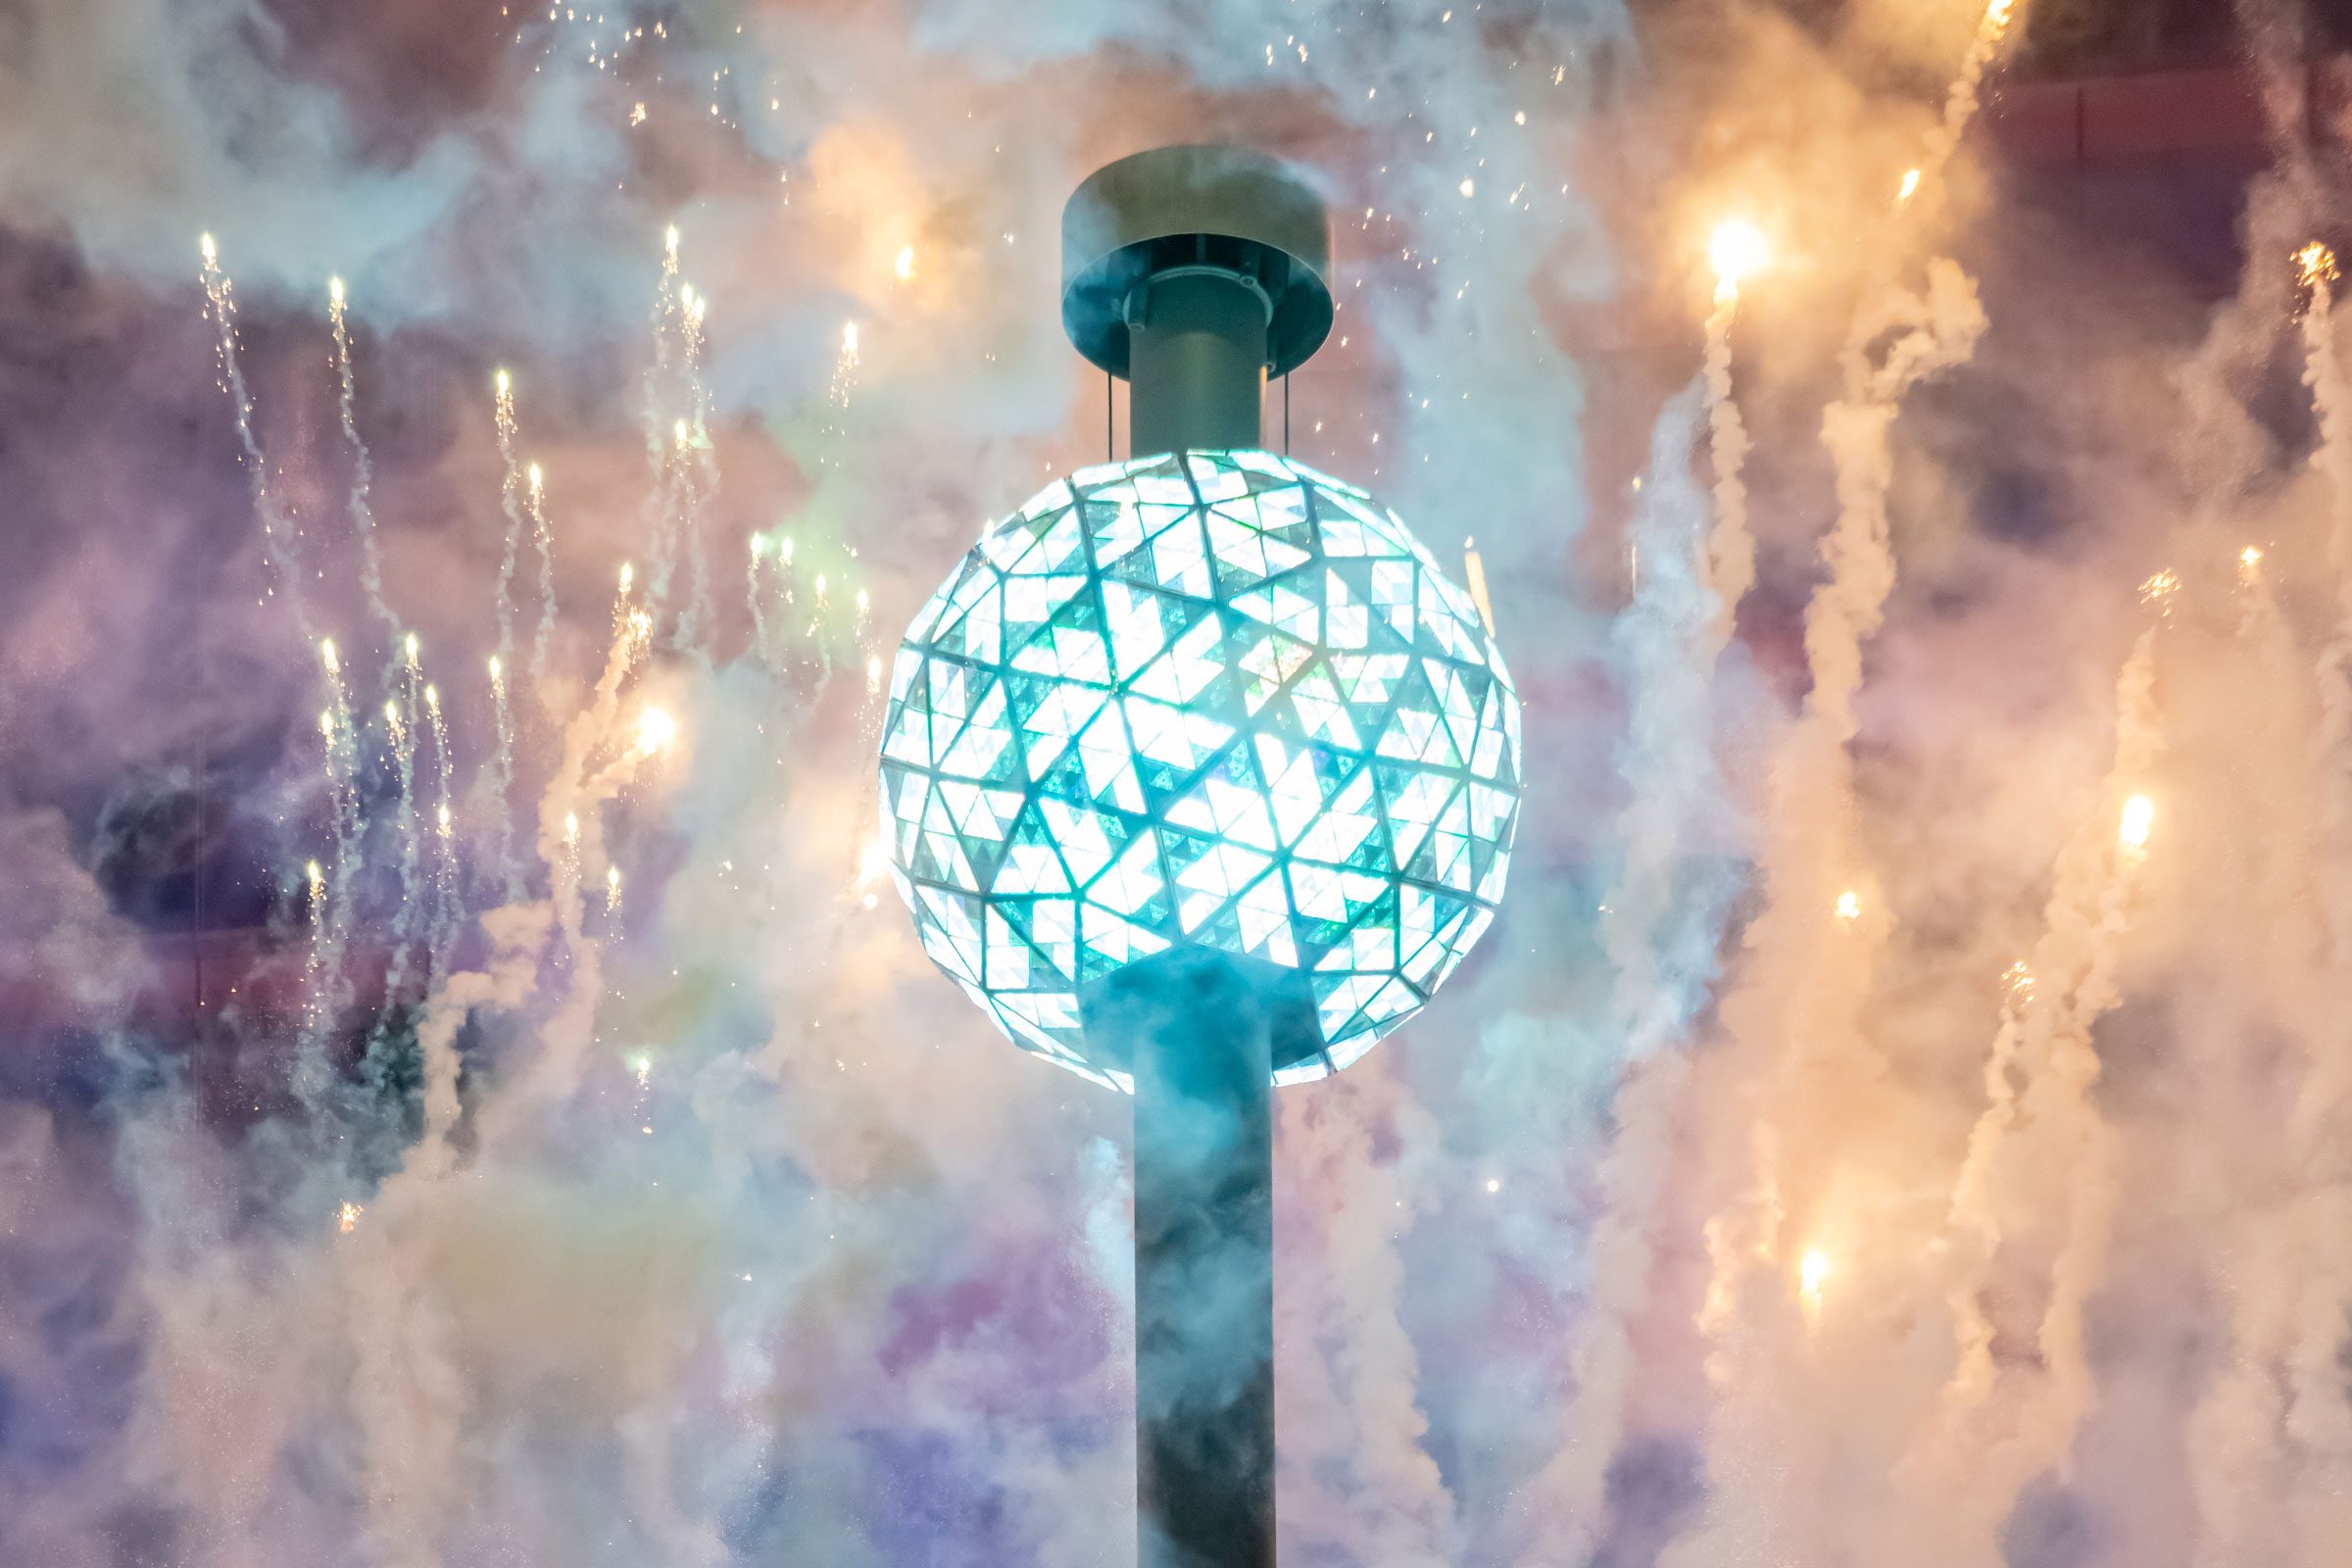 New Years New York Ball Drop Channel